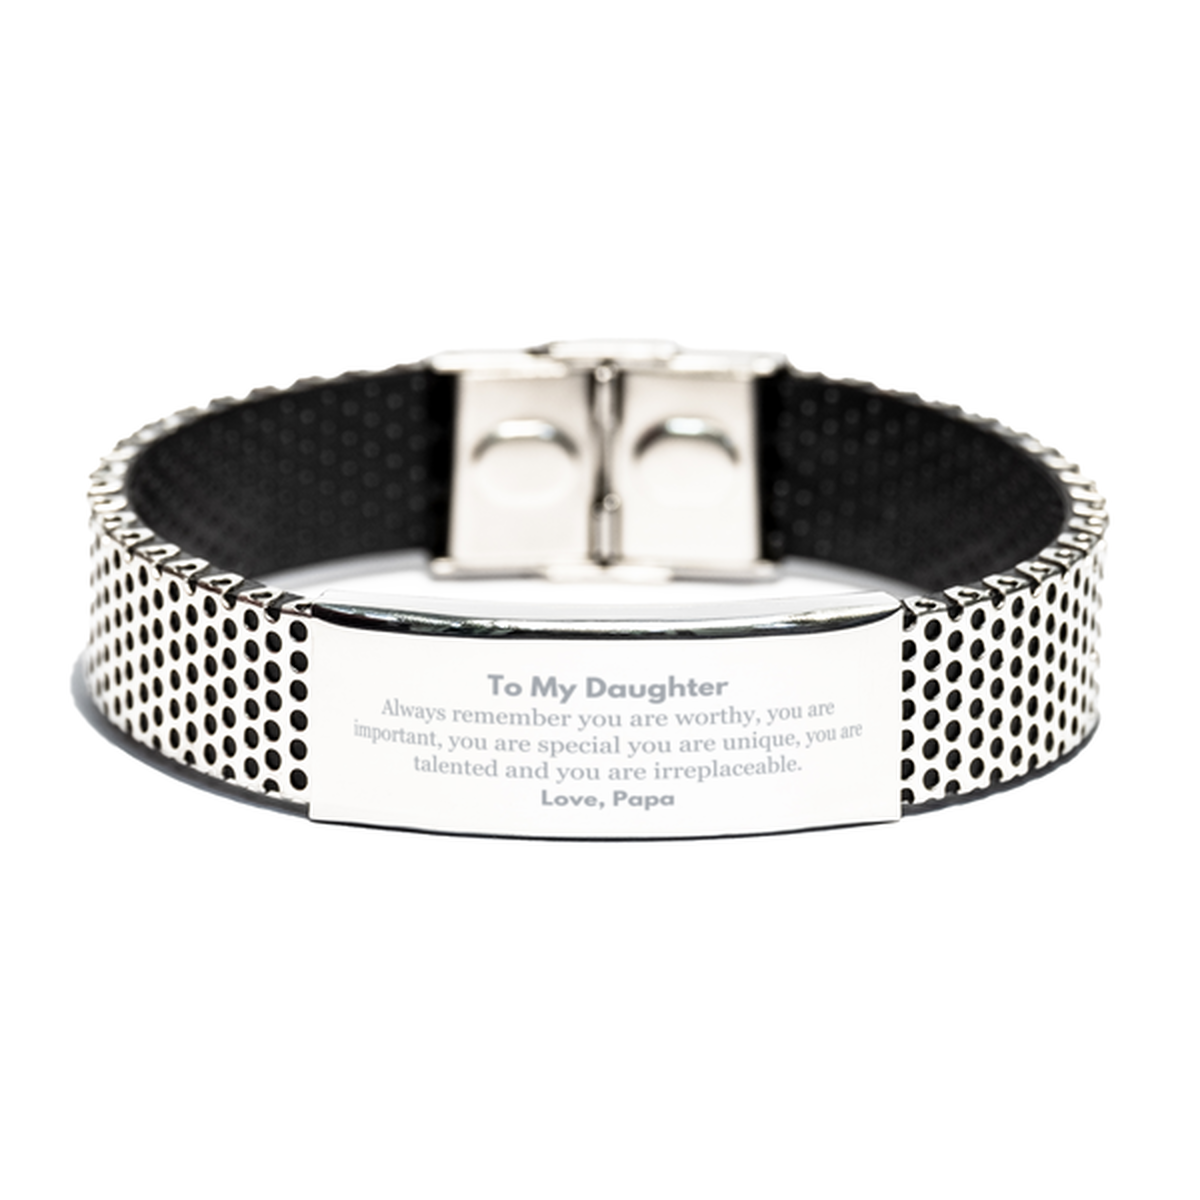 Daughter Birthday Gifts from Papa, Inspirational Stainless Steel Bracelet for Daughter Christmas Graduation Gifts for Daughter Always remember you are worthy, you are important. Love, Papa